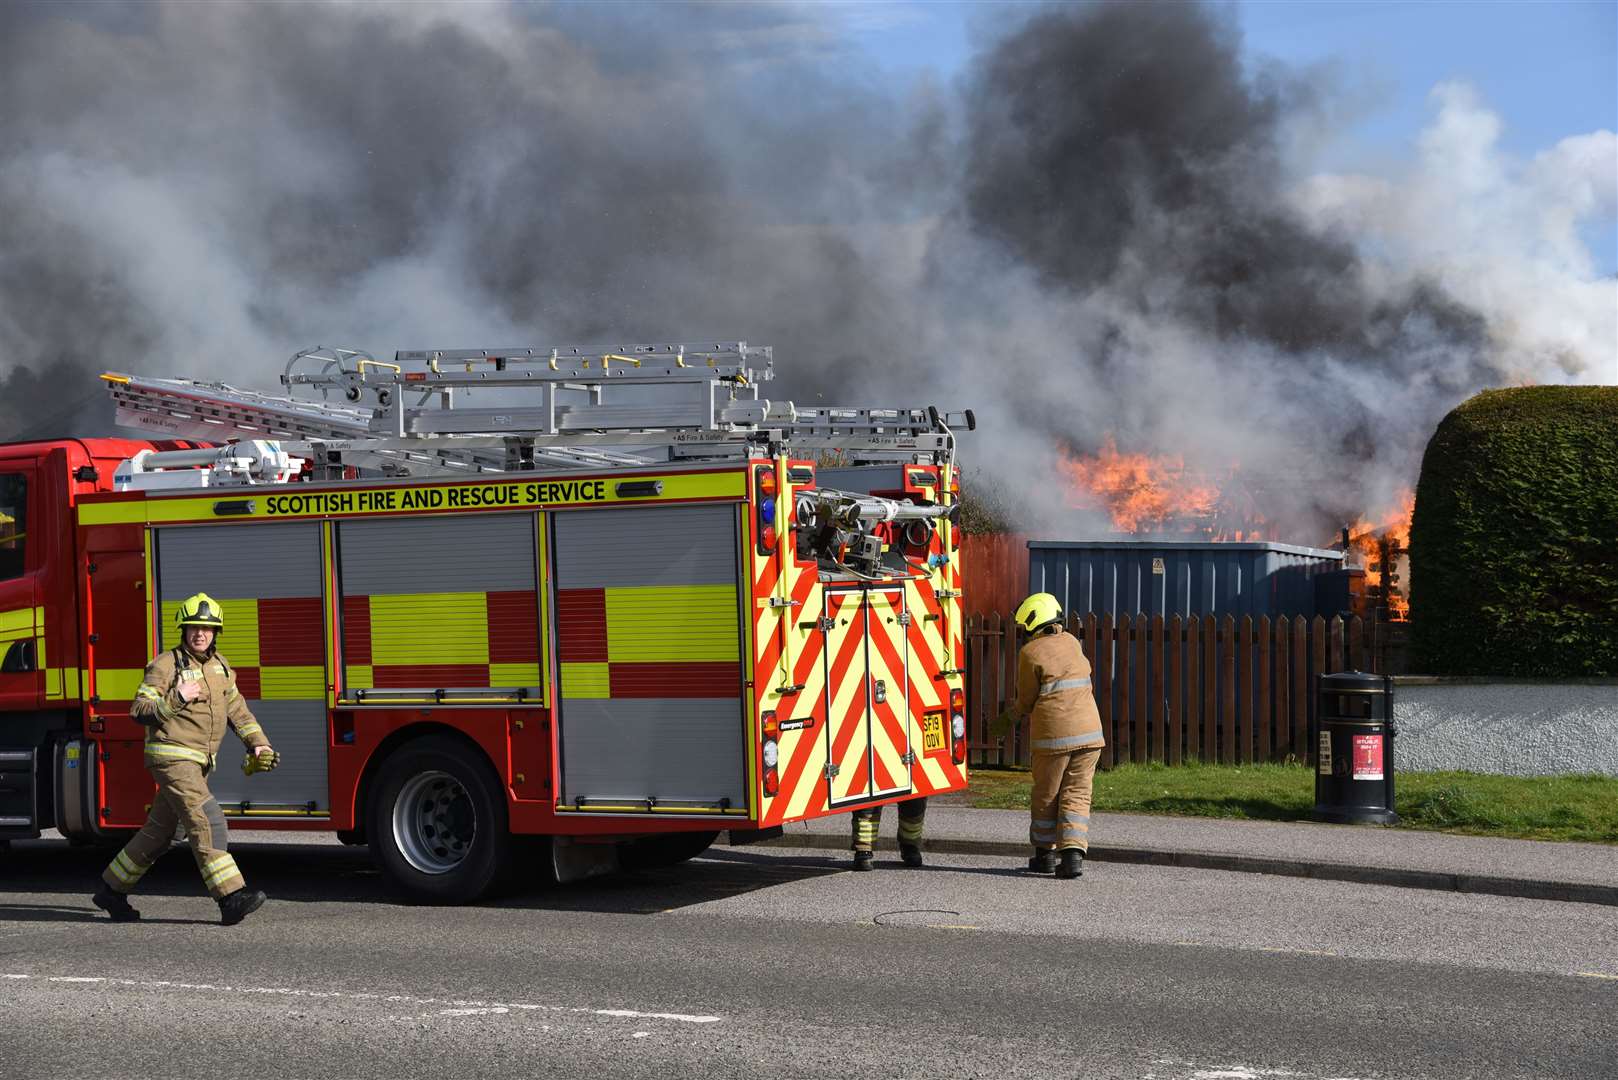 Two fire crews were called to a blaze in an outhouse at Cradlehall Park.